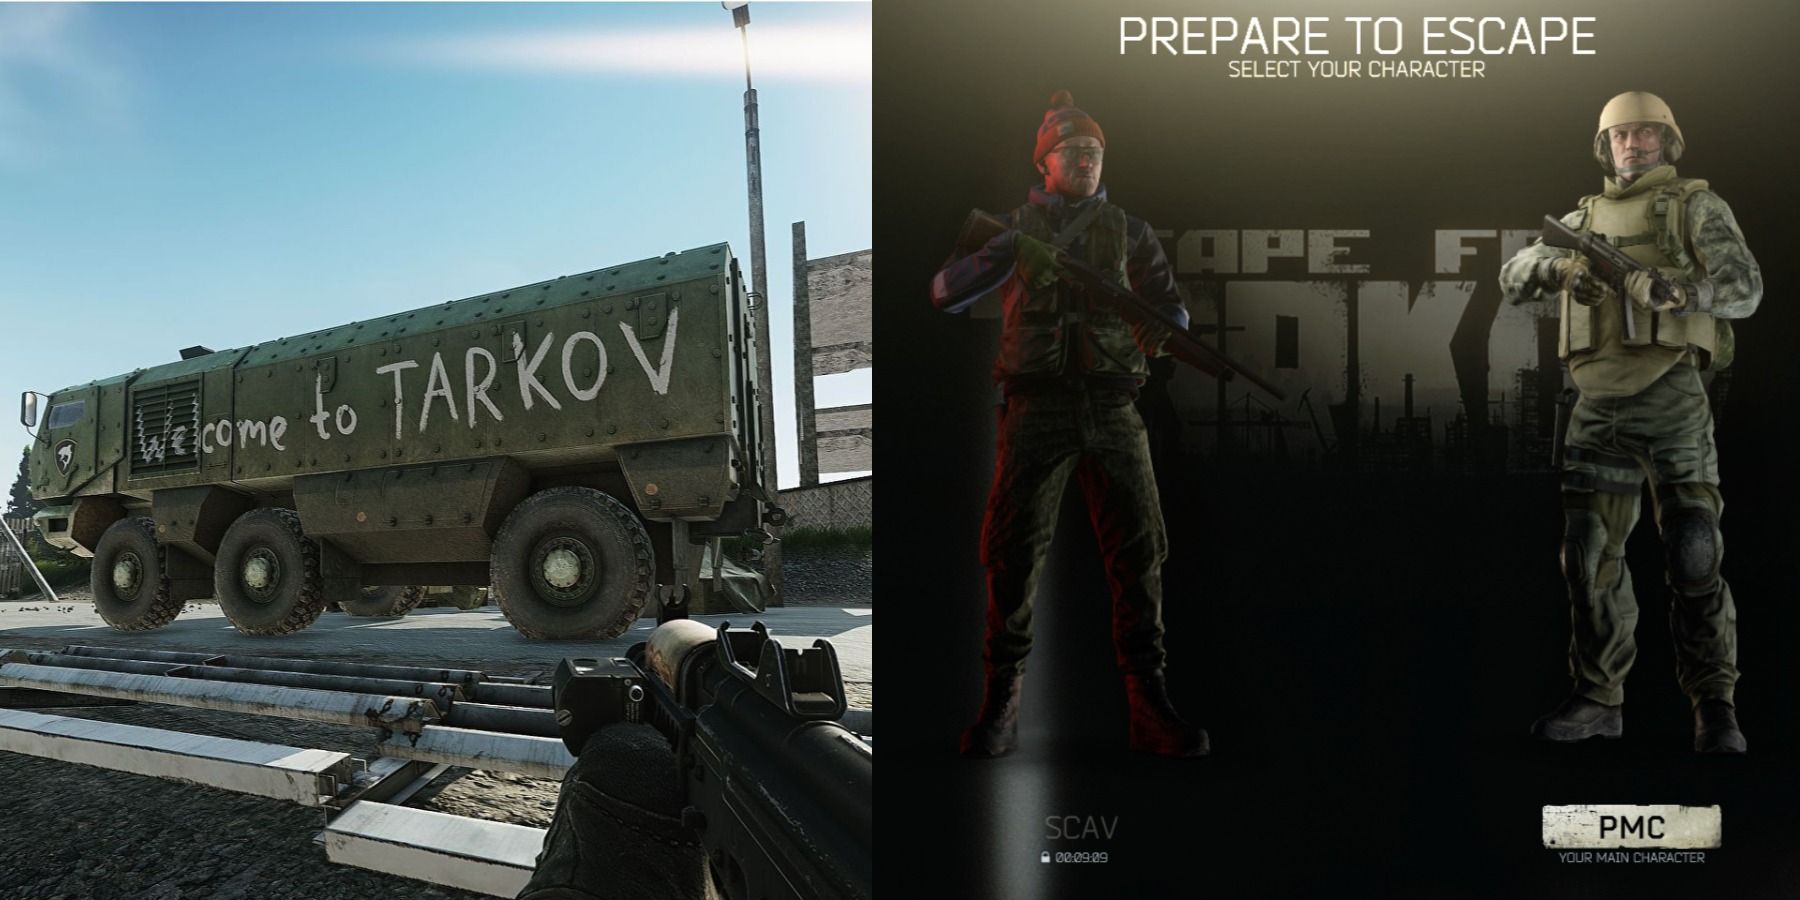 Welcome to early wipe Tarkov where the mods are whatever you find